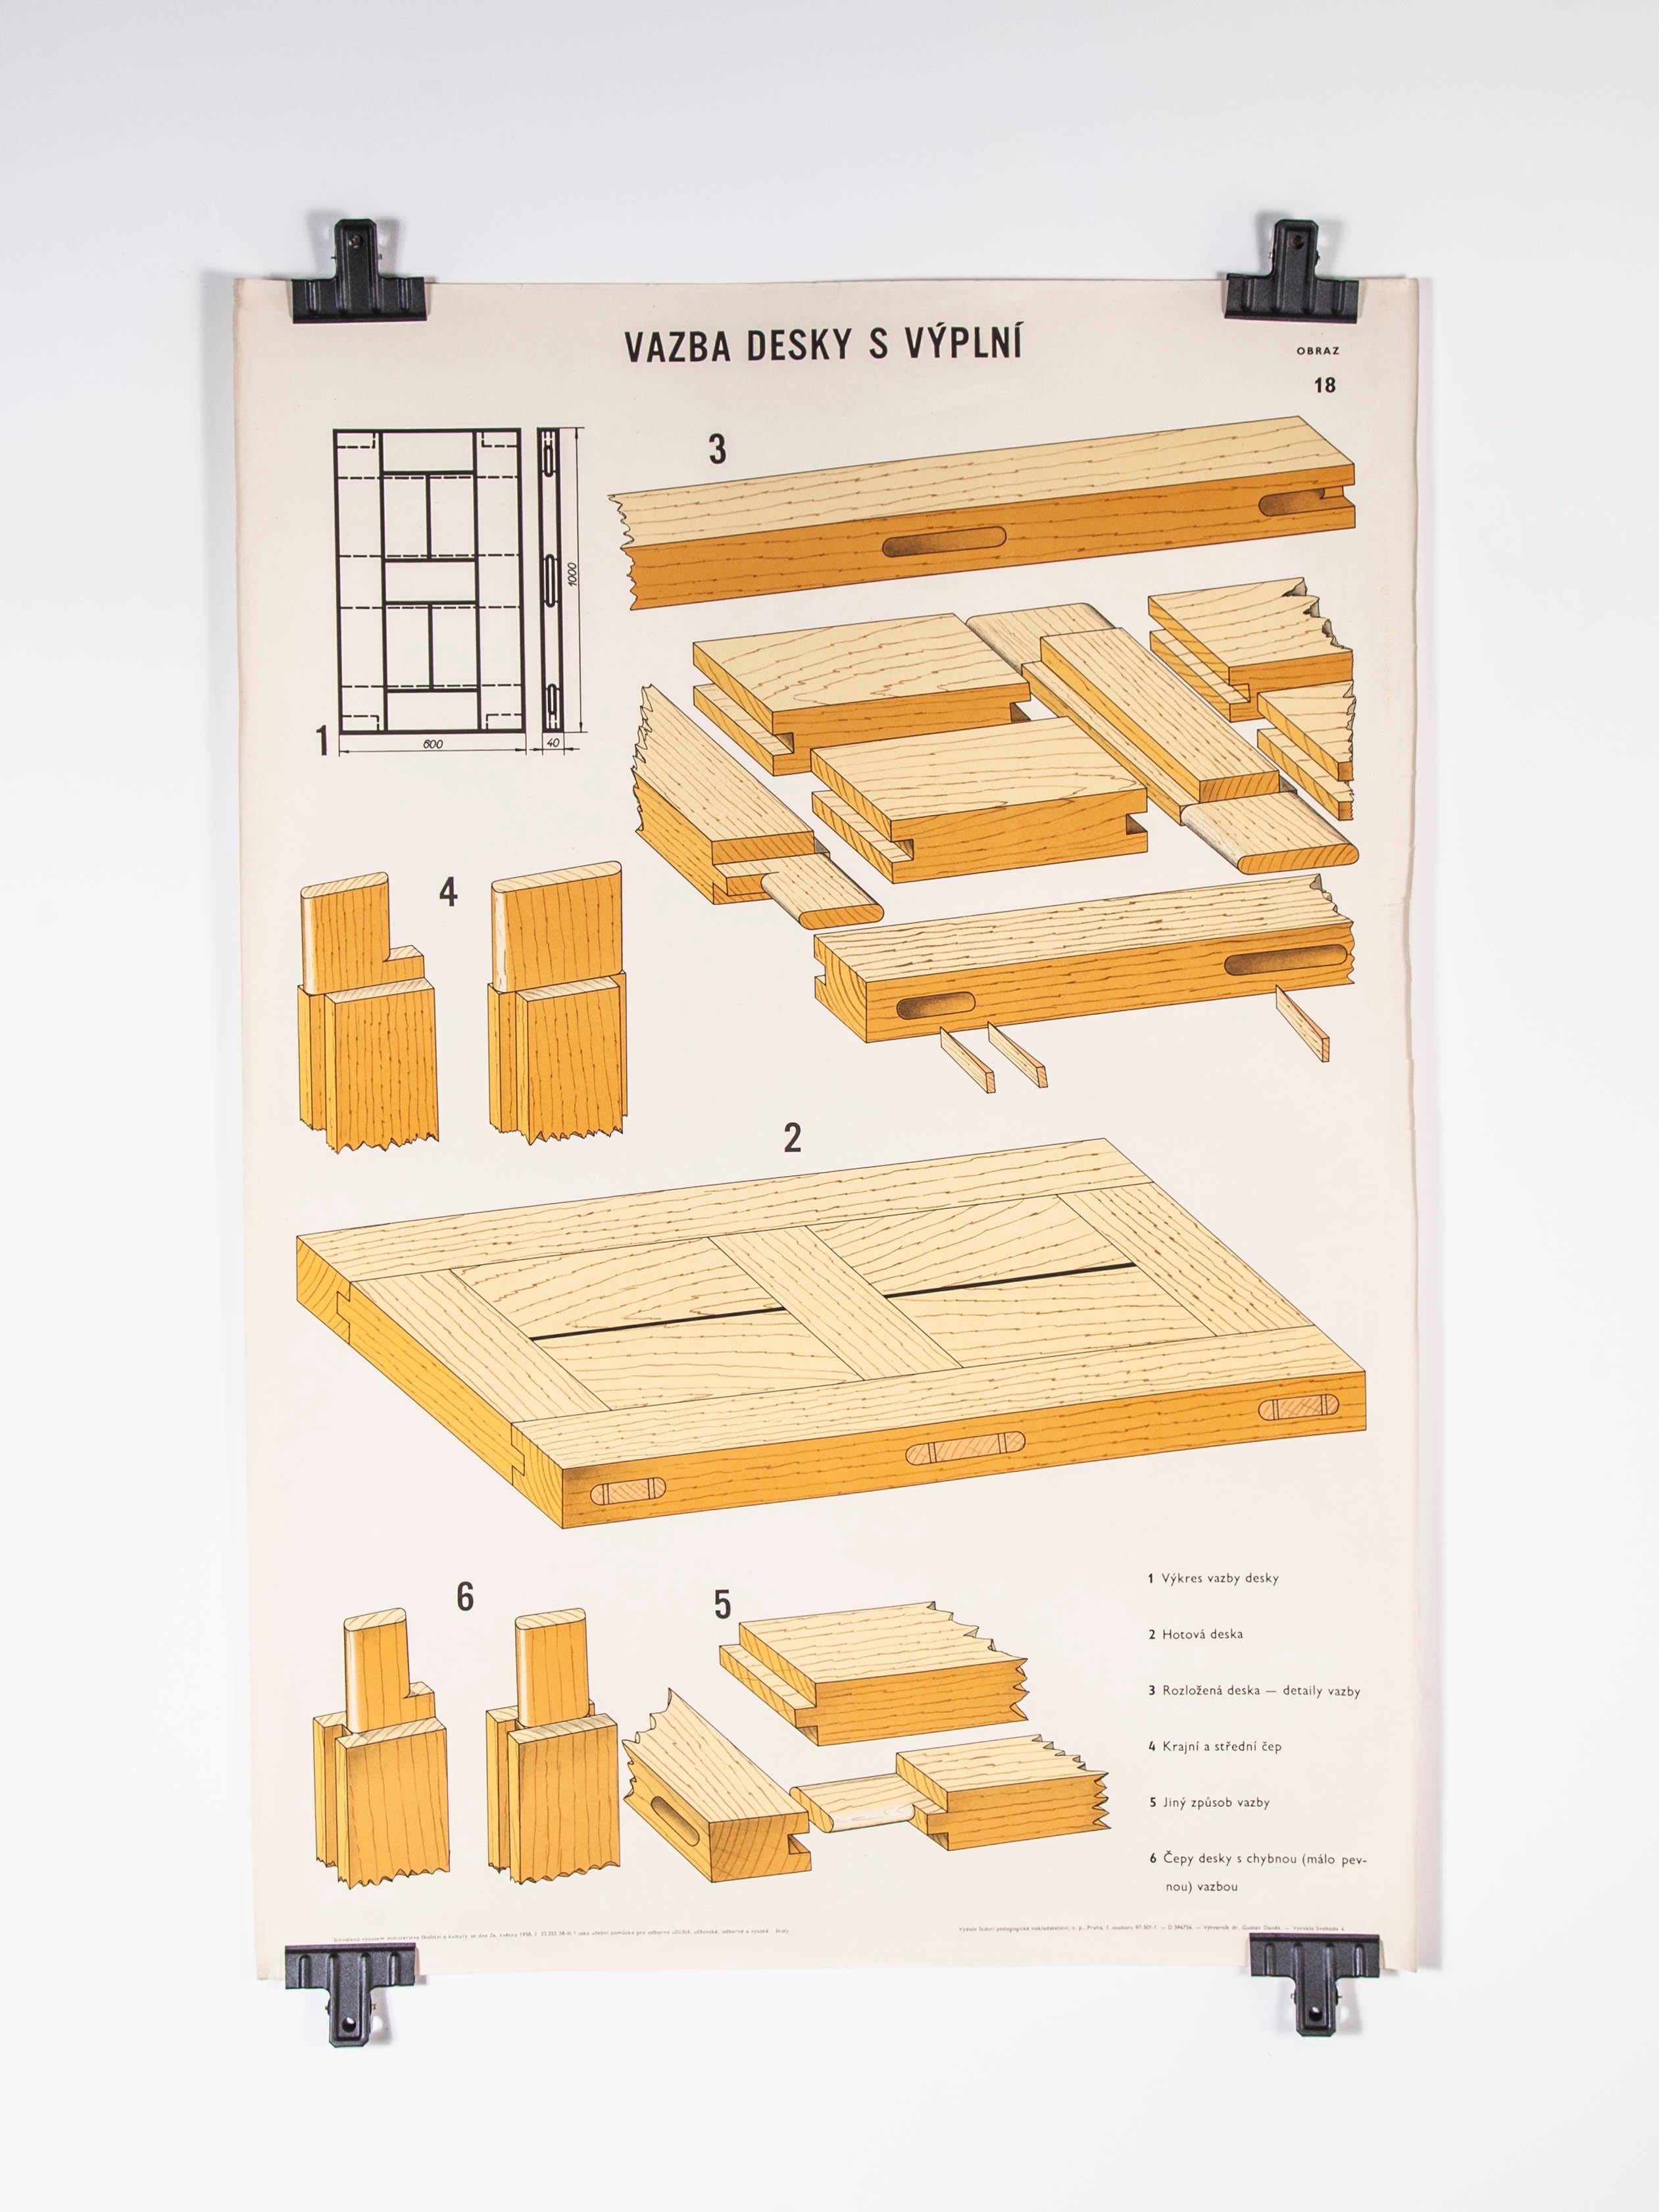 Czech technical industrial drawing, foundry mould engineering poster – 18

Sourced from an old engineering workshop in the Czech Republic, an amazing series of technical Industrial drawings explaining the process of sand casting and creating the